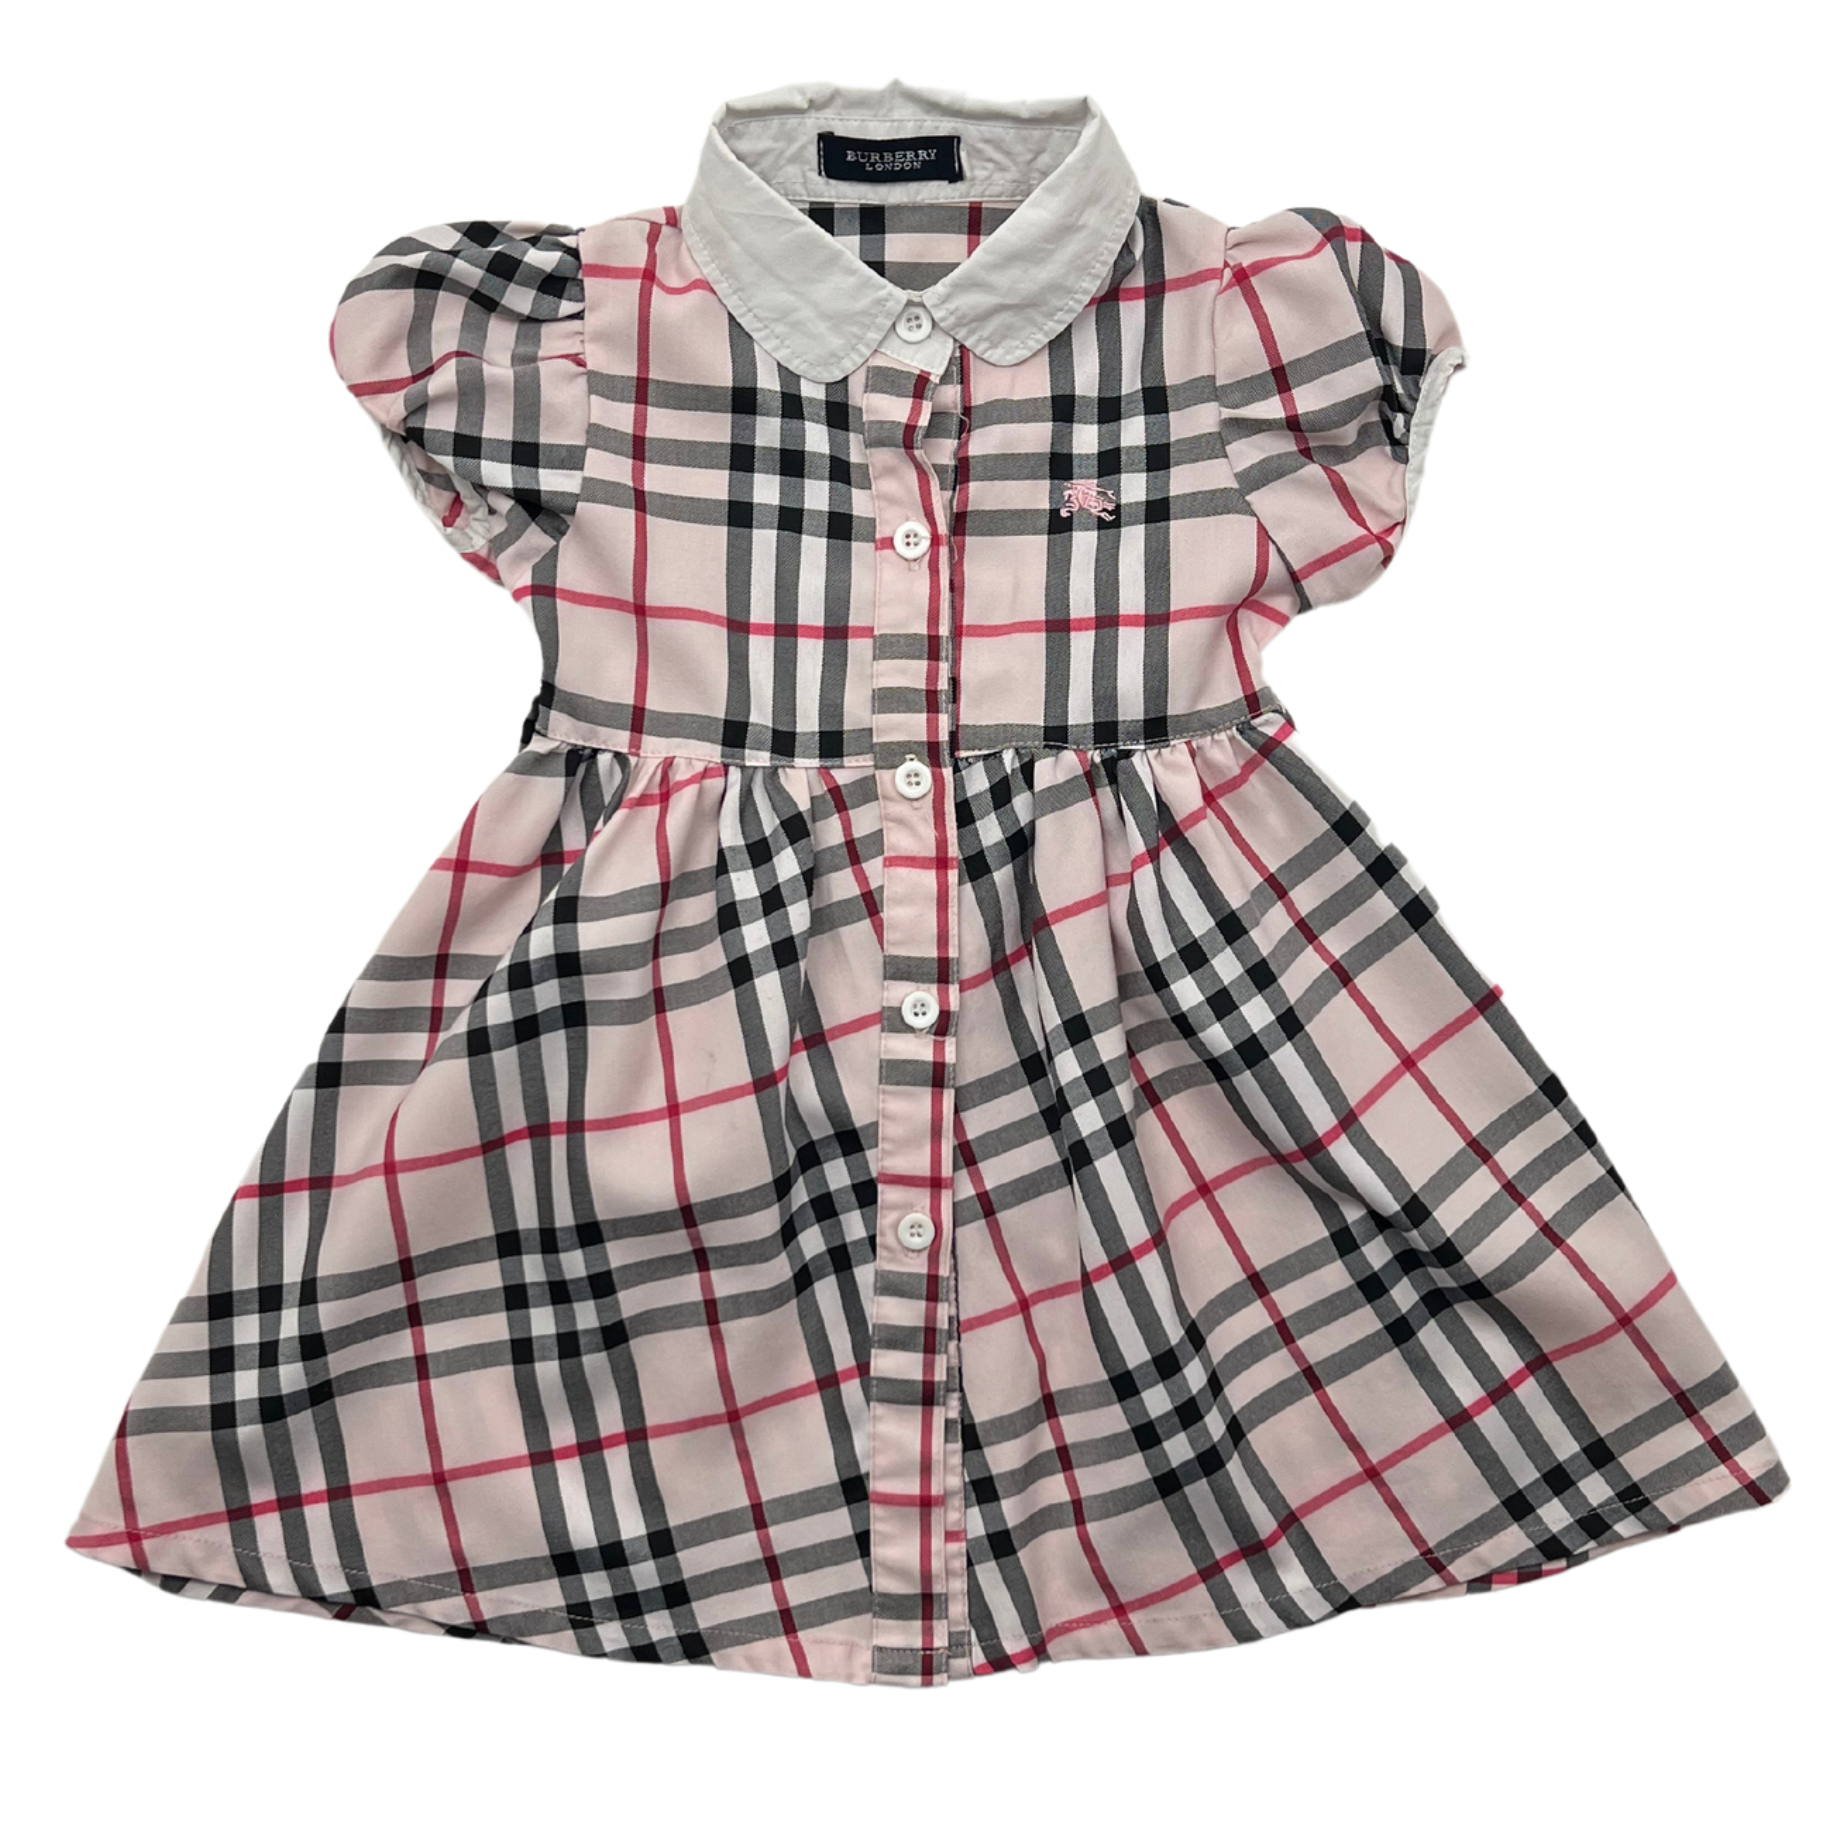 BURBERRY - Checked dress - 2/4 years